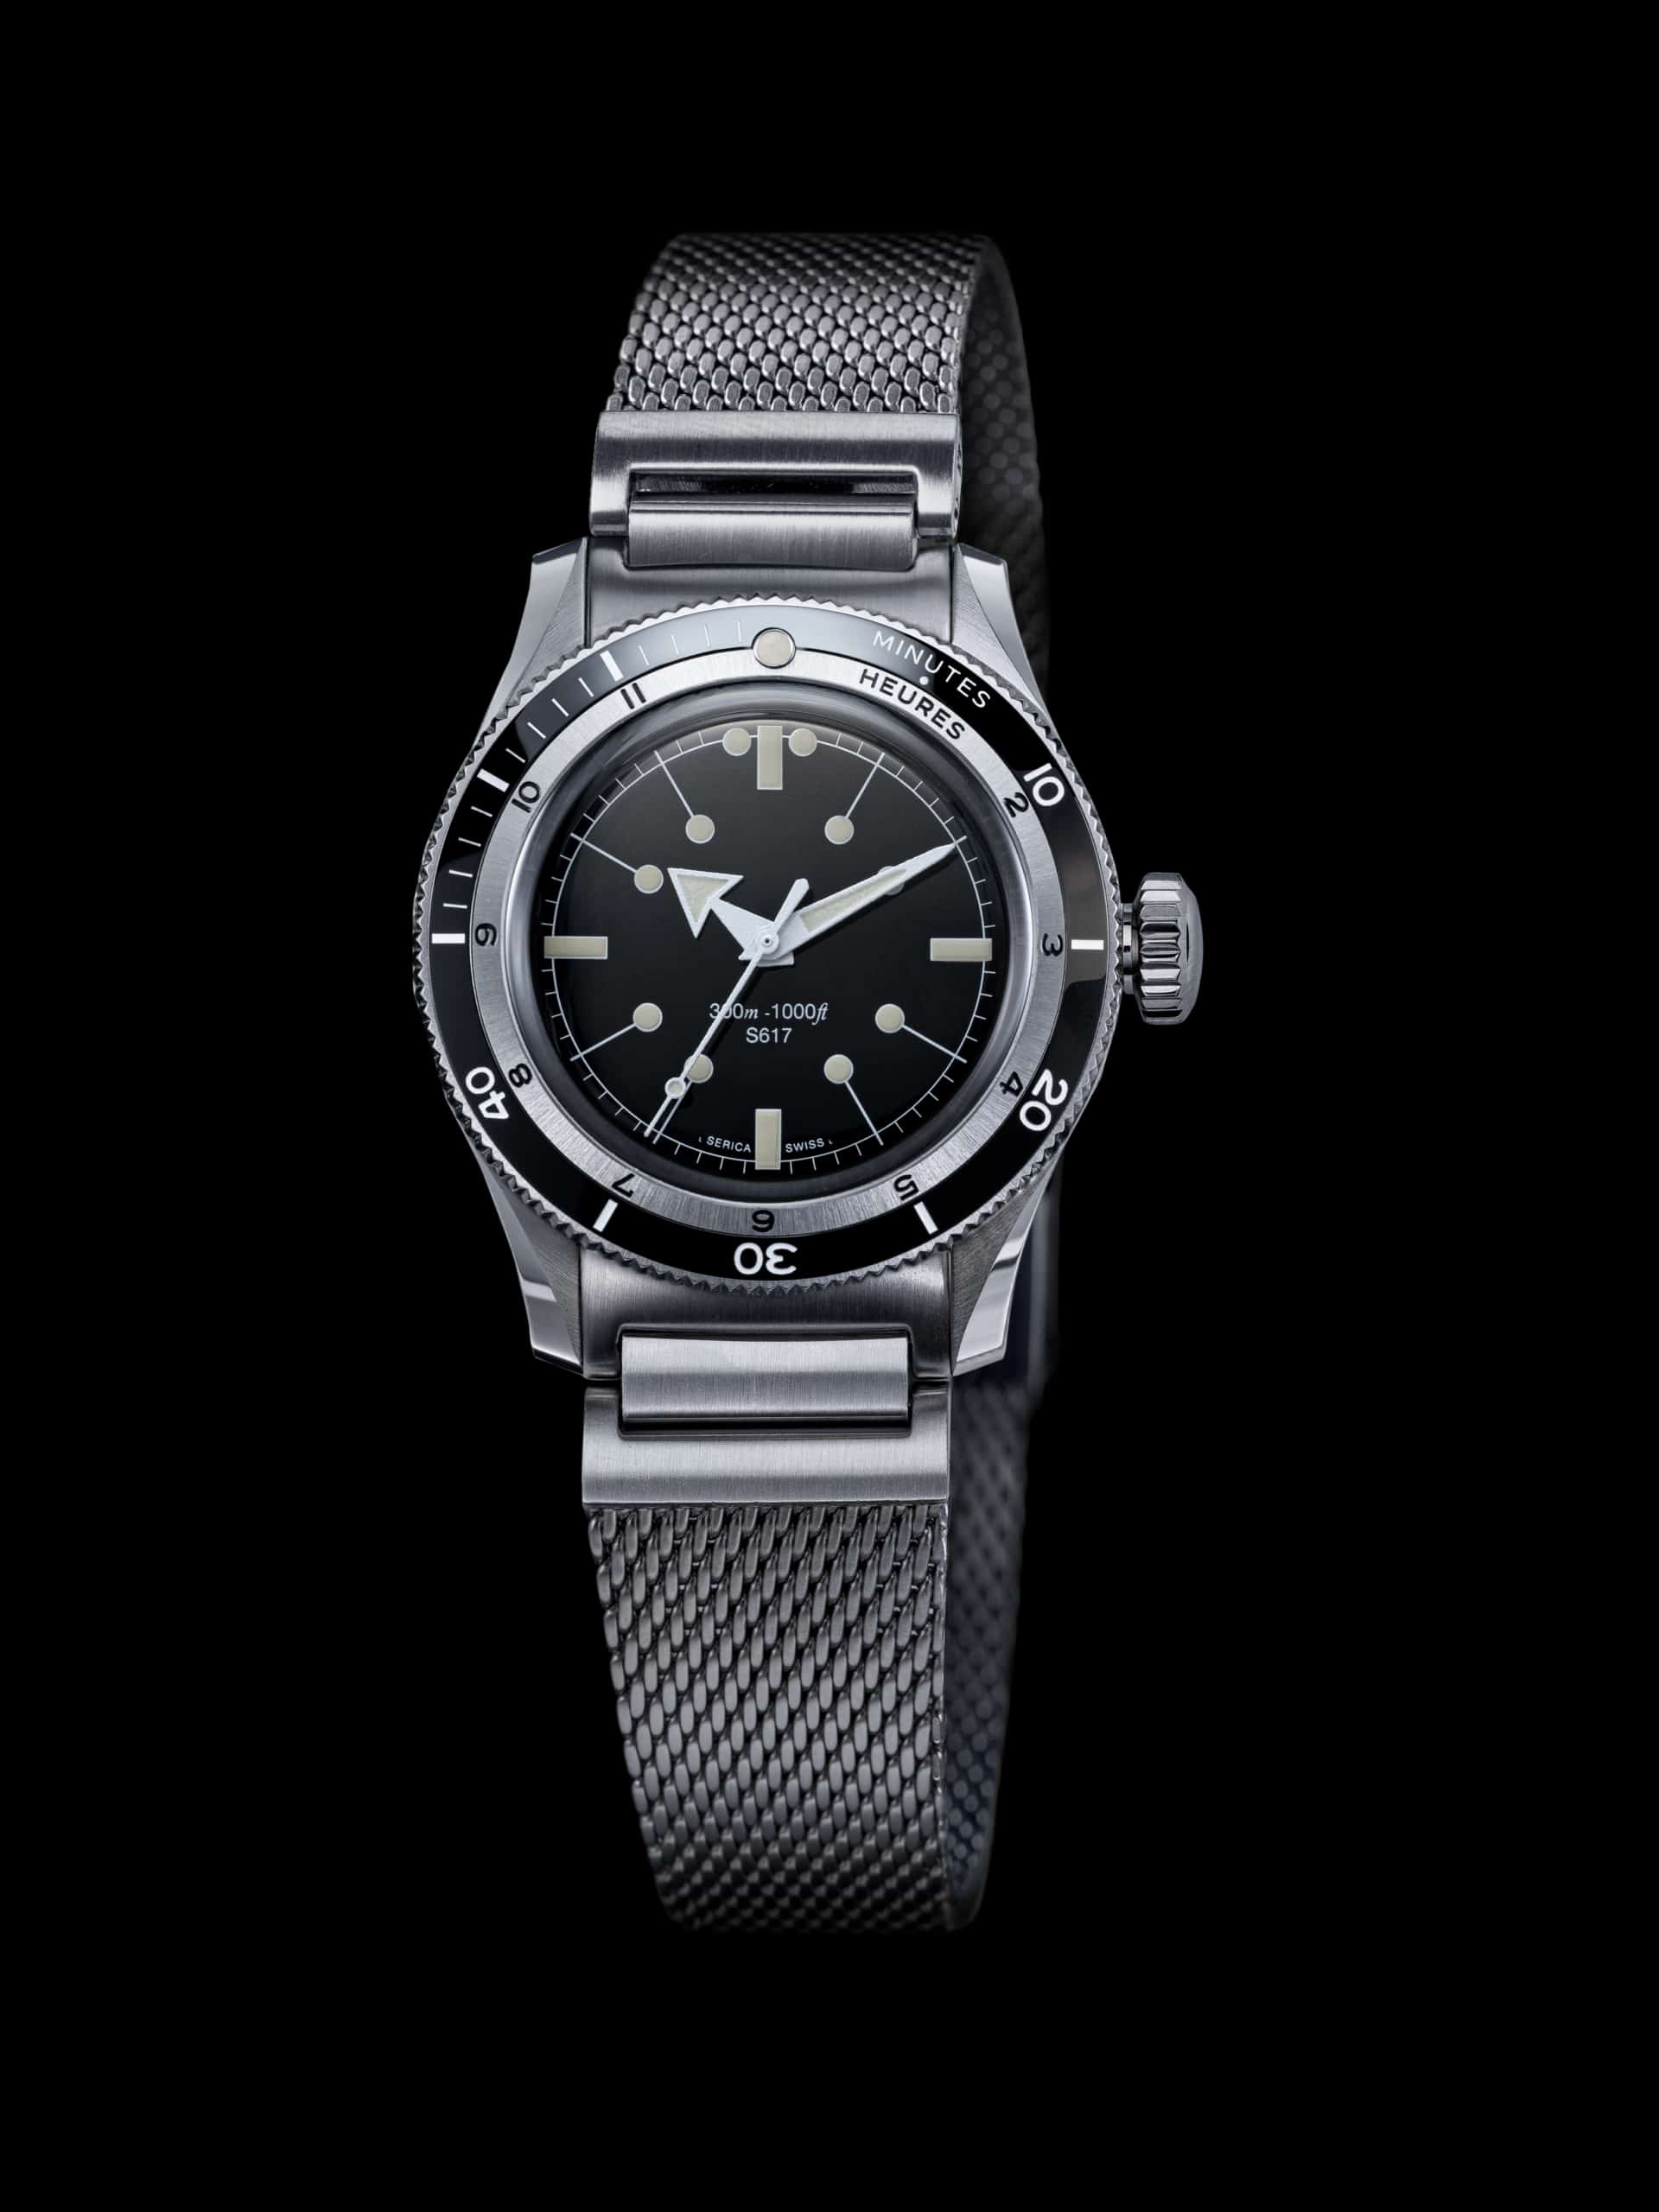 Introducing The Serica S617 ref. 5303 Dive Watch